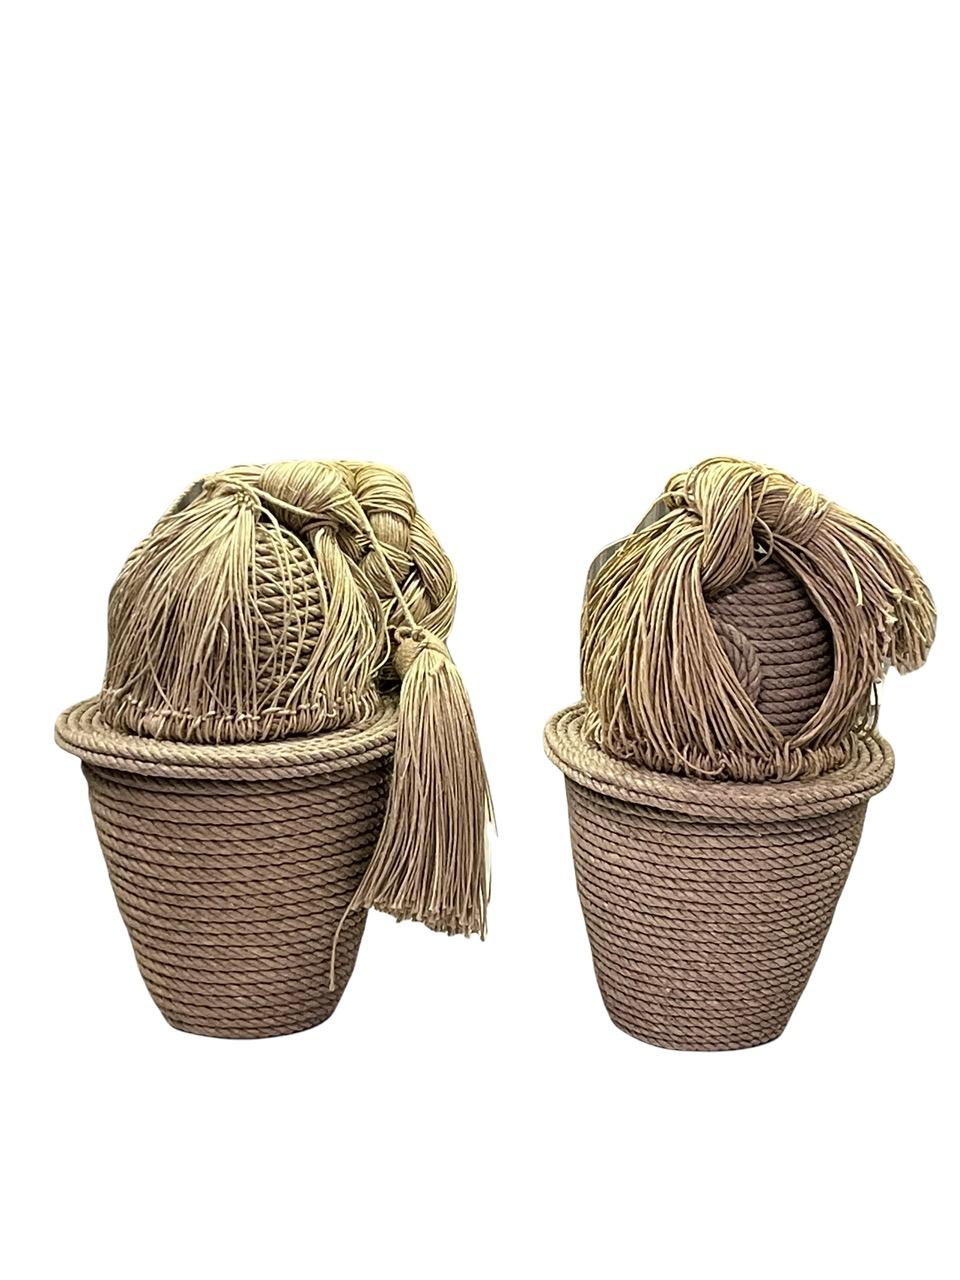 Pair of Contemporary 21st Century French Christian Astuguevieille Jute Rope Co 1